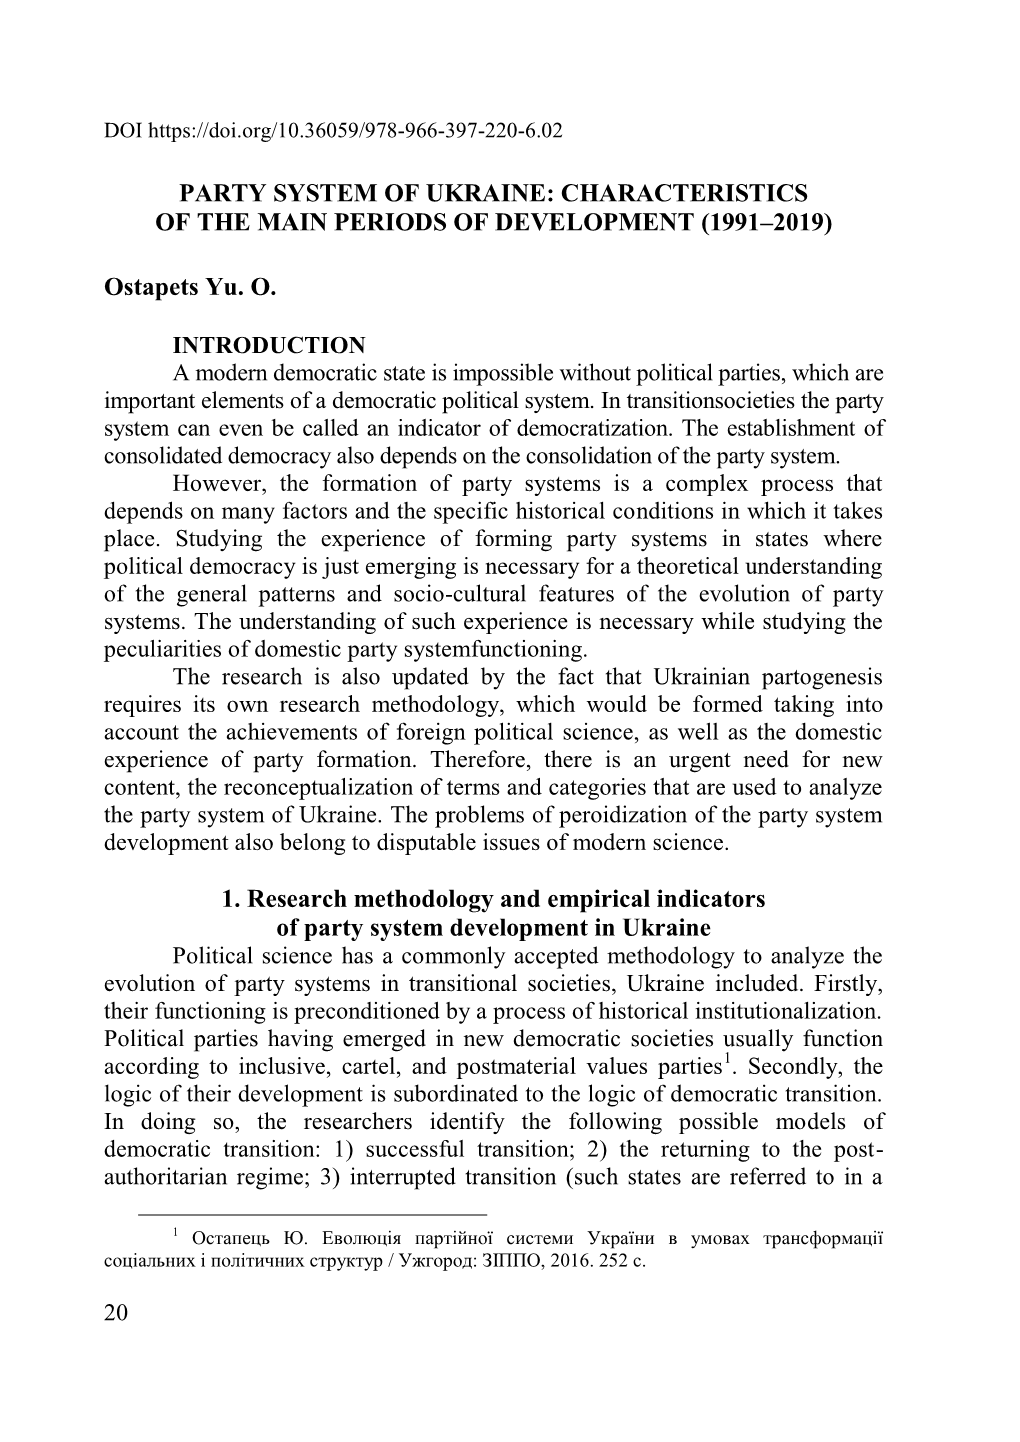 Party System of Ukraine: Characteristics of the Main Periods of Development (1991–2019)